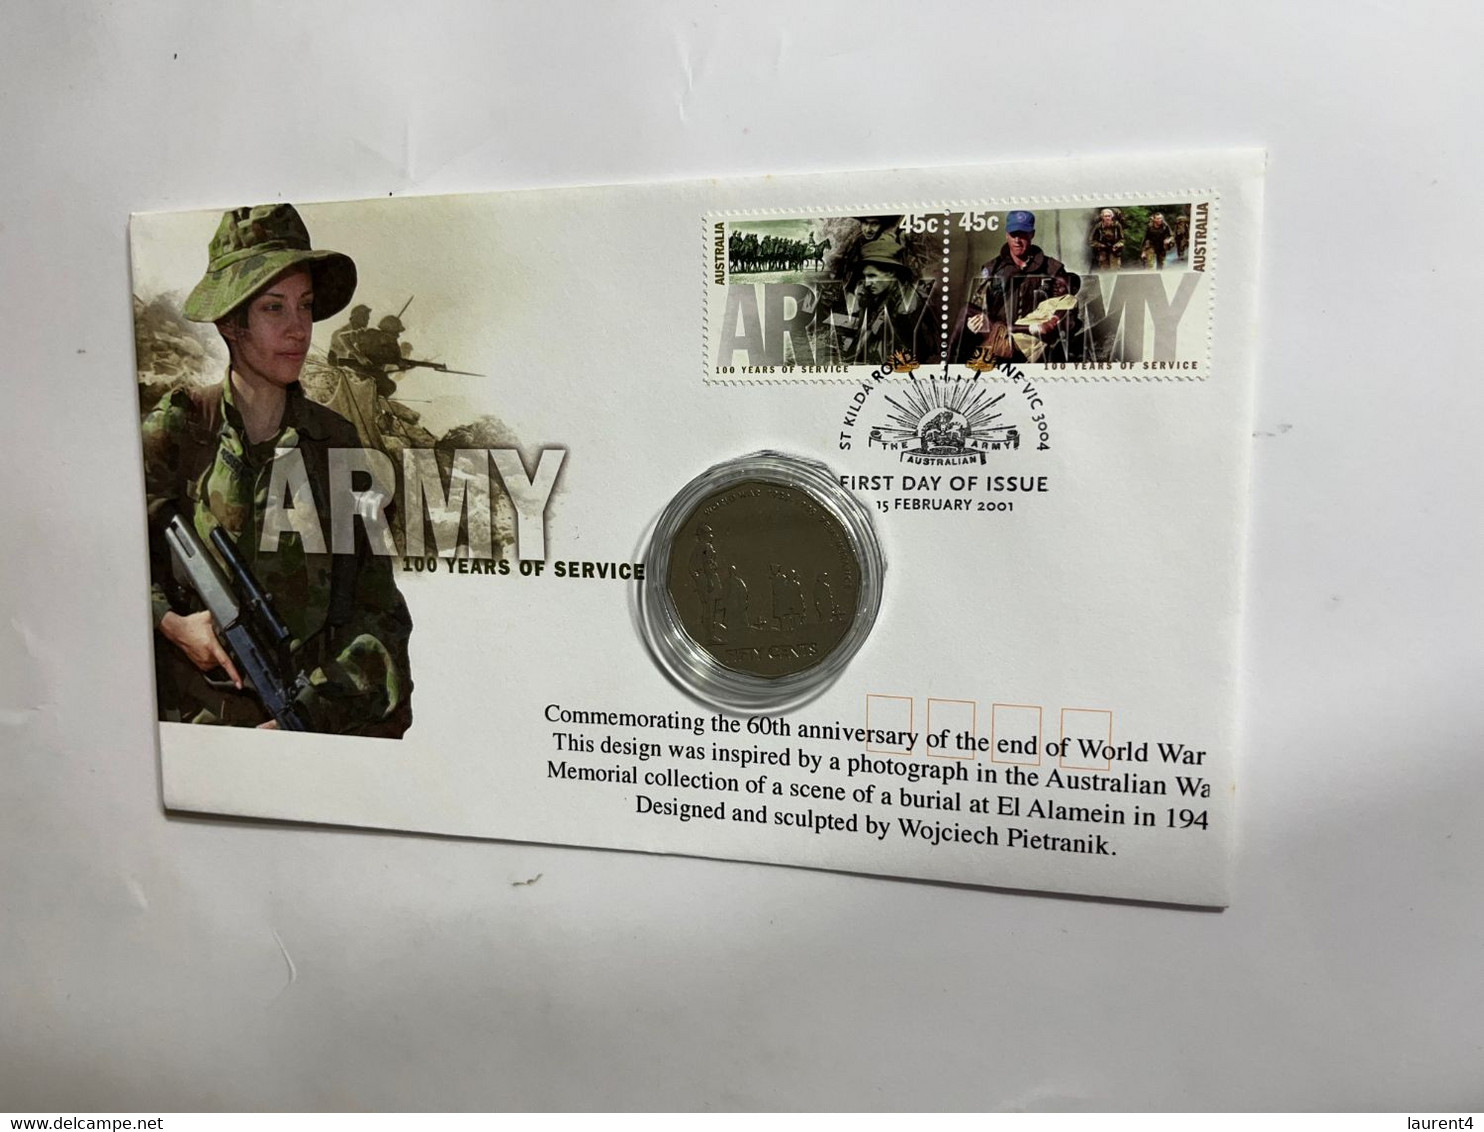 (4 M 38) Australia - 50 Cent Coin End Of WWII Coin On Army 100 Years Of Service FDC Cover 2001 (St Kilda P/m) - 20 Cents